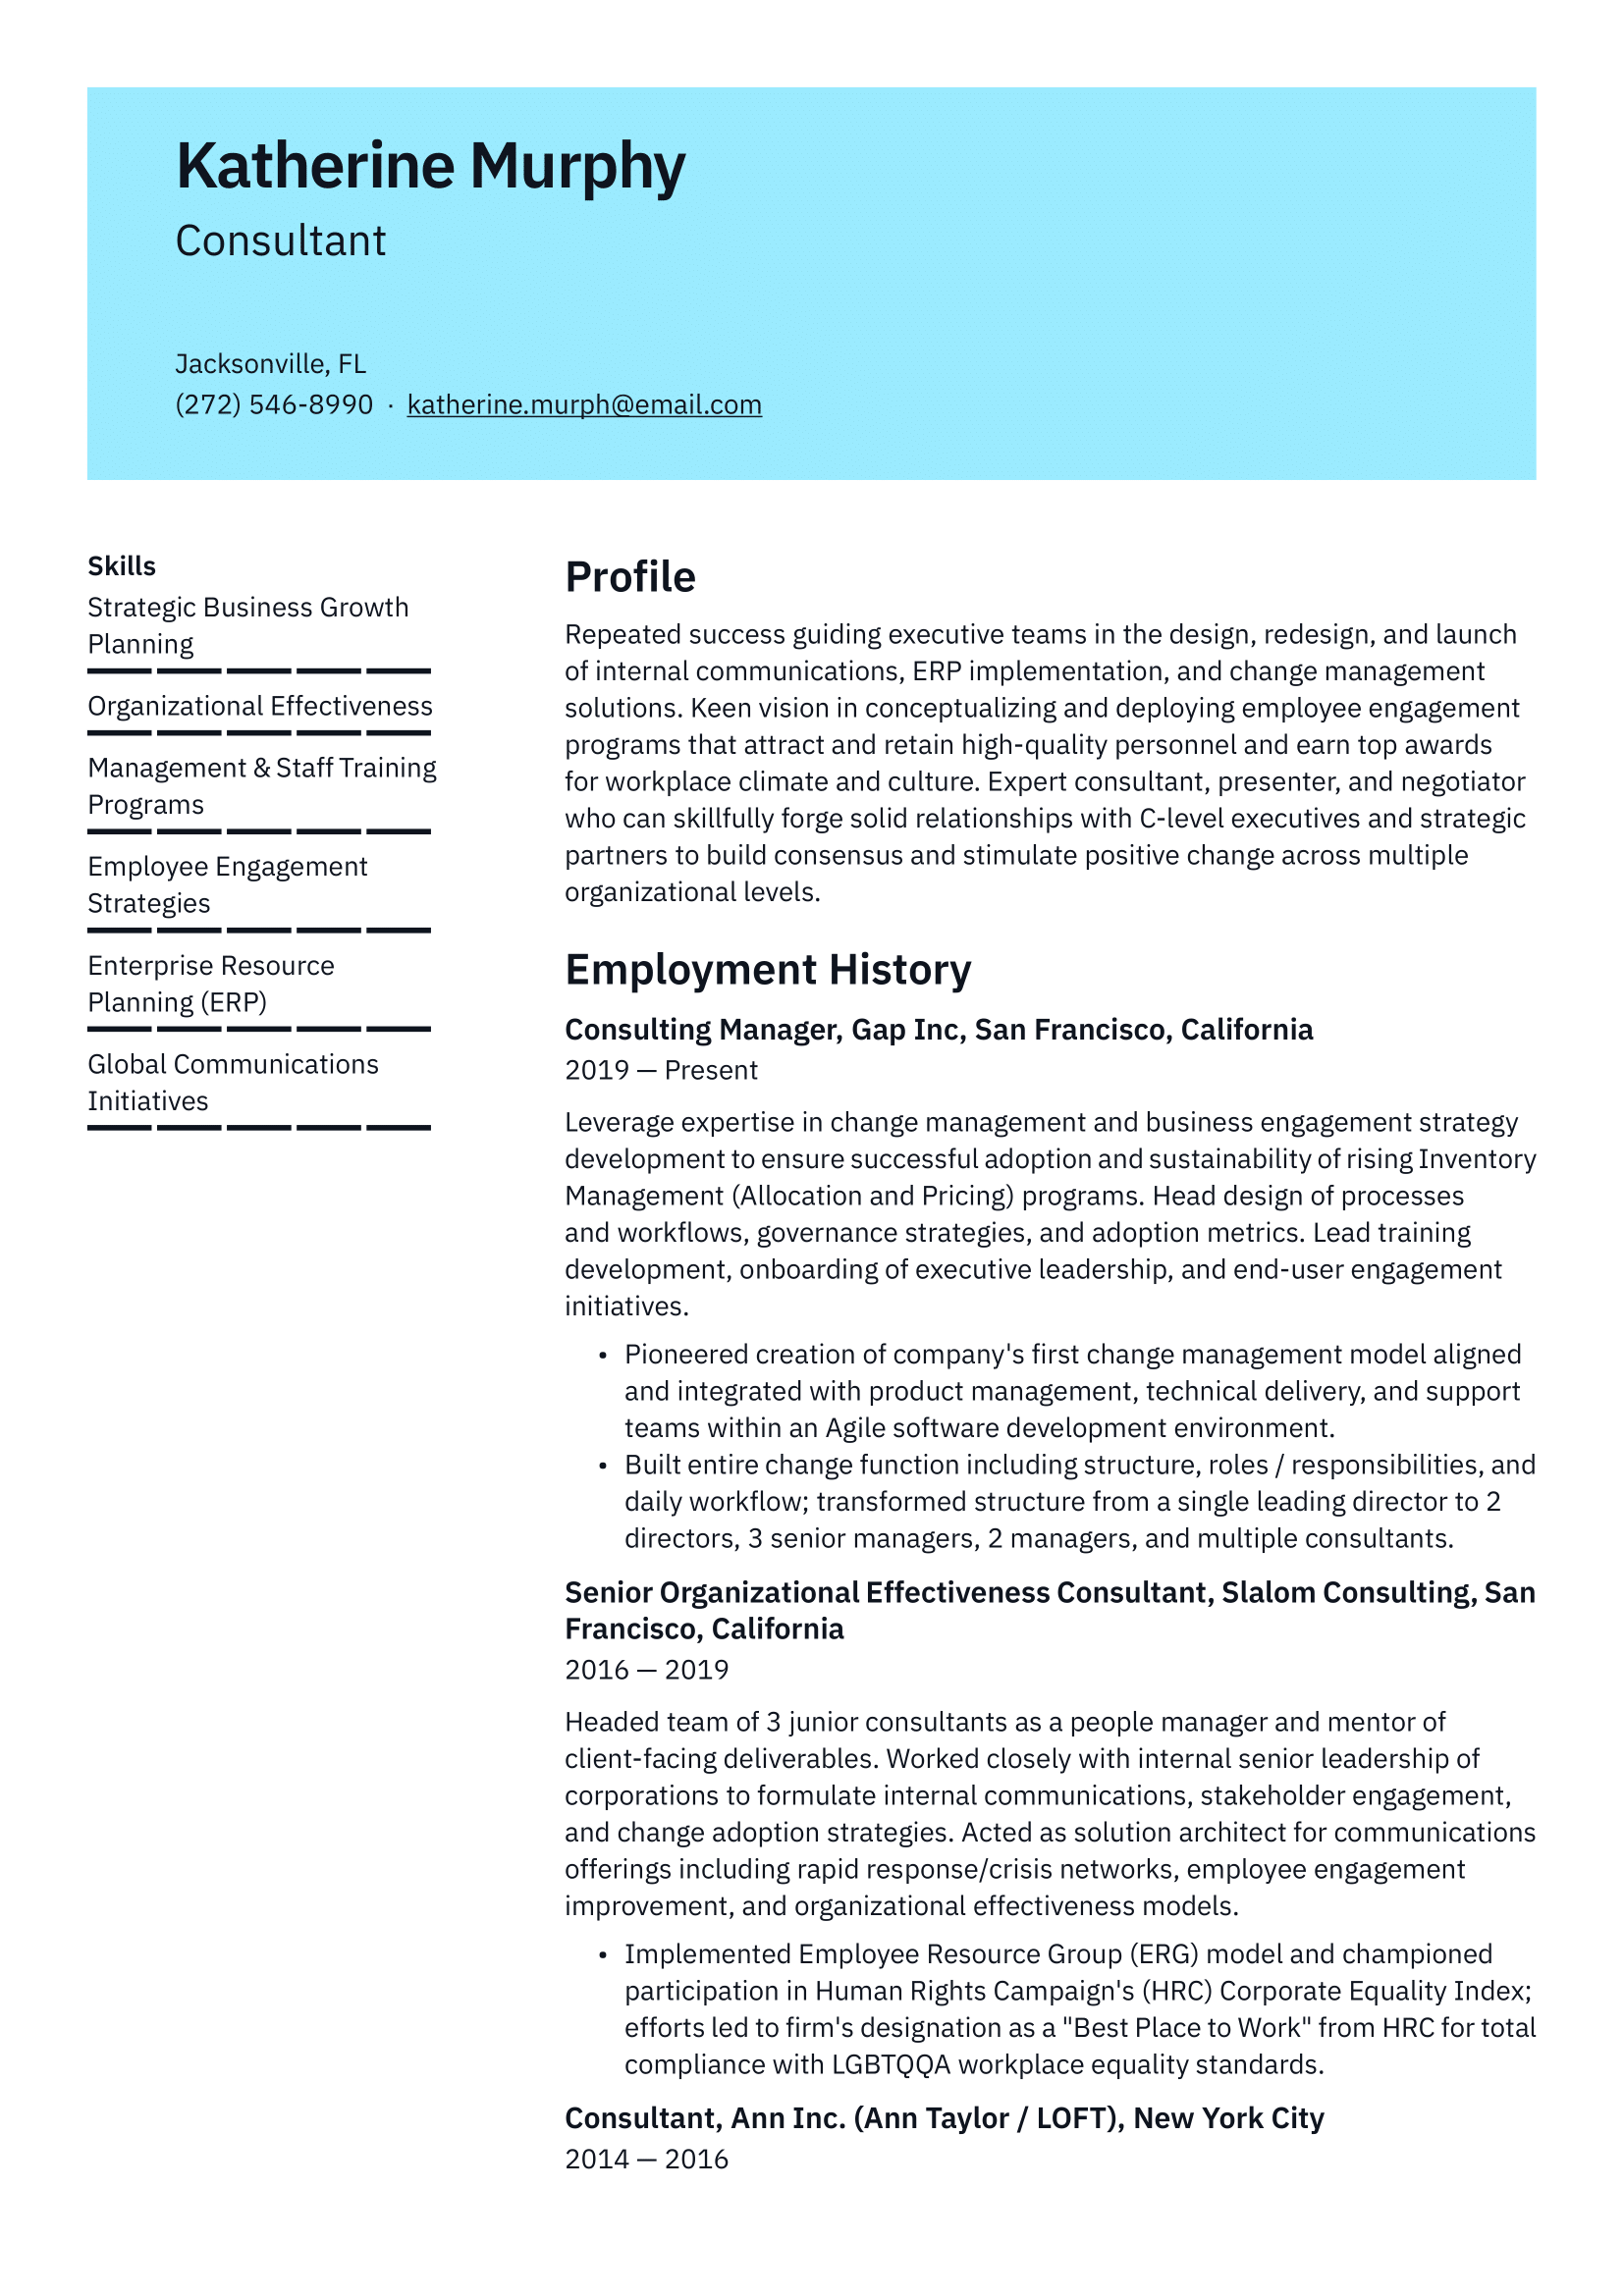 Consultant Resume Example & Writing Guide